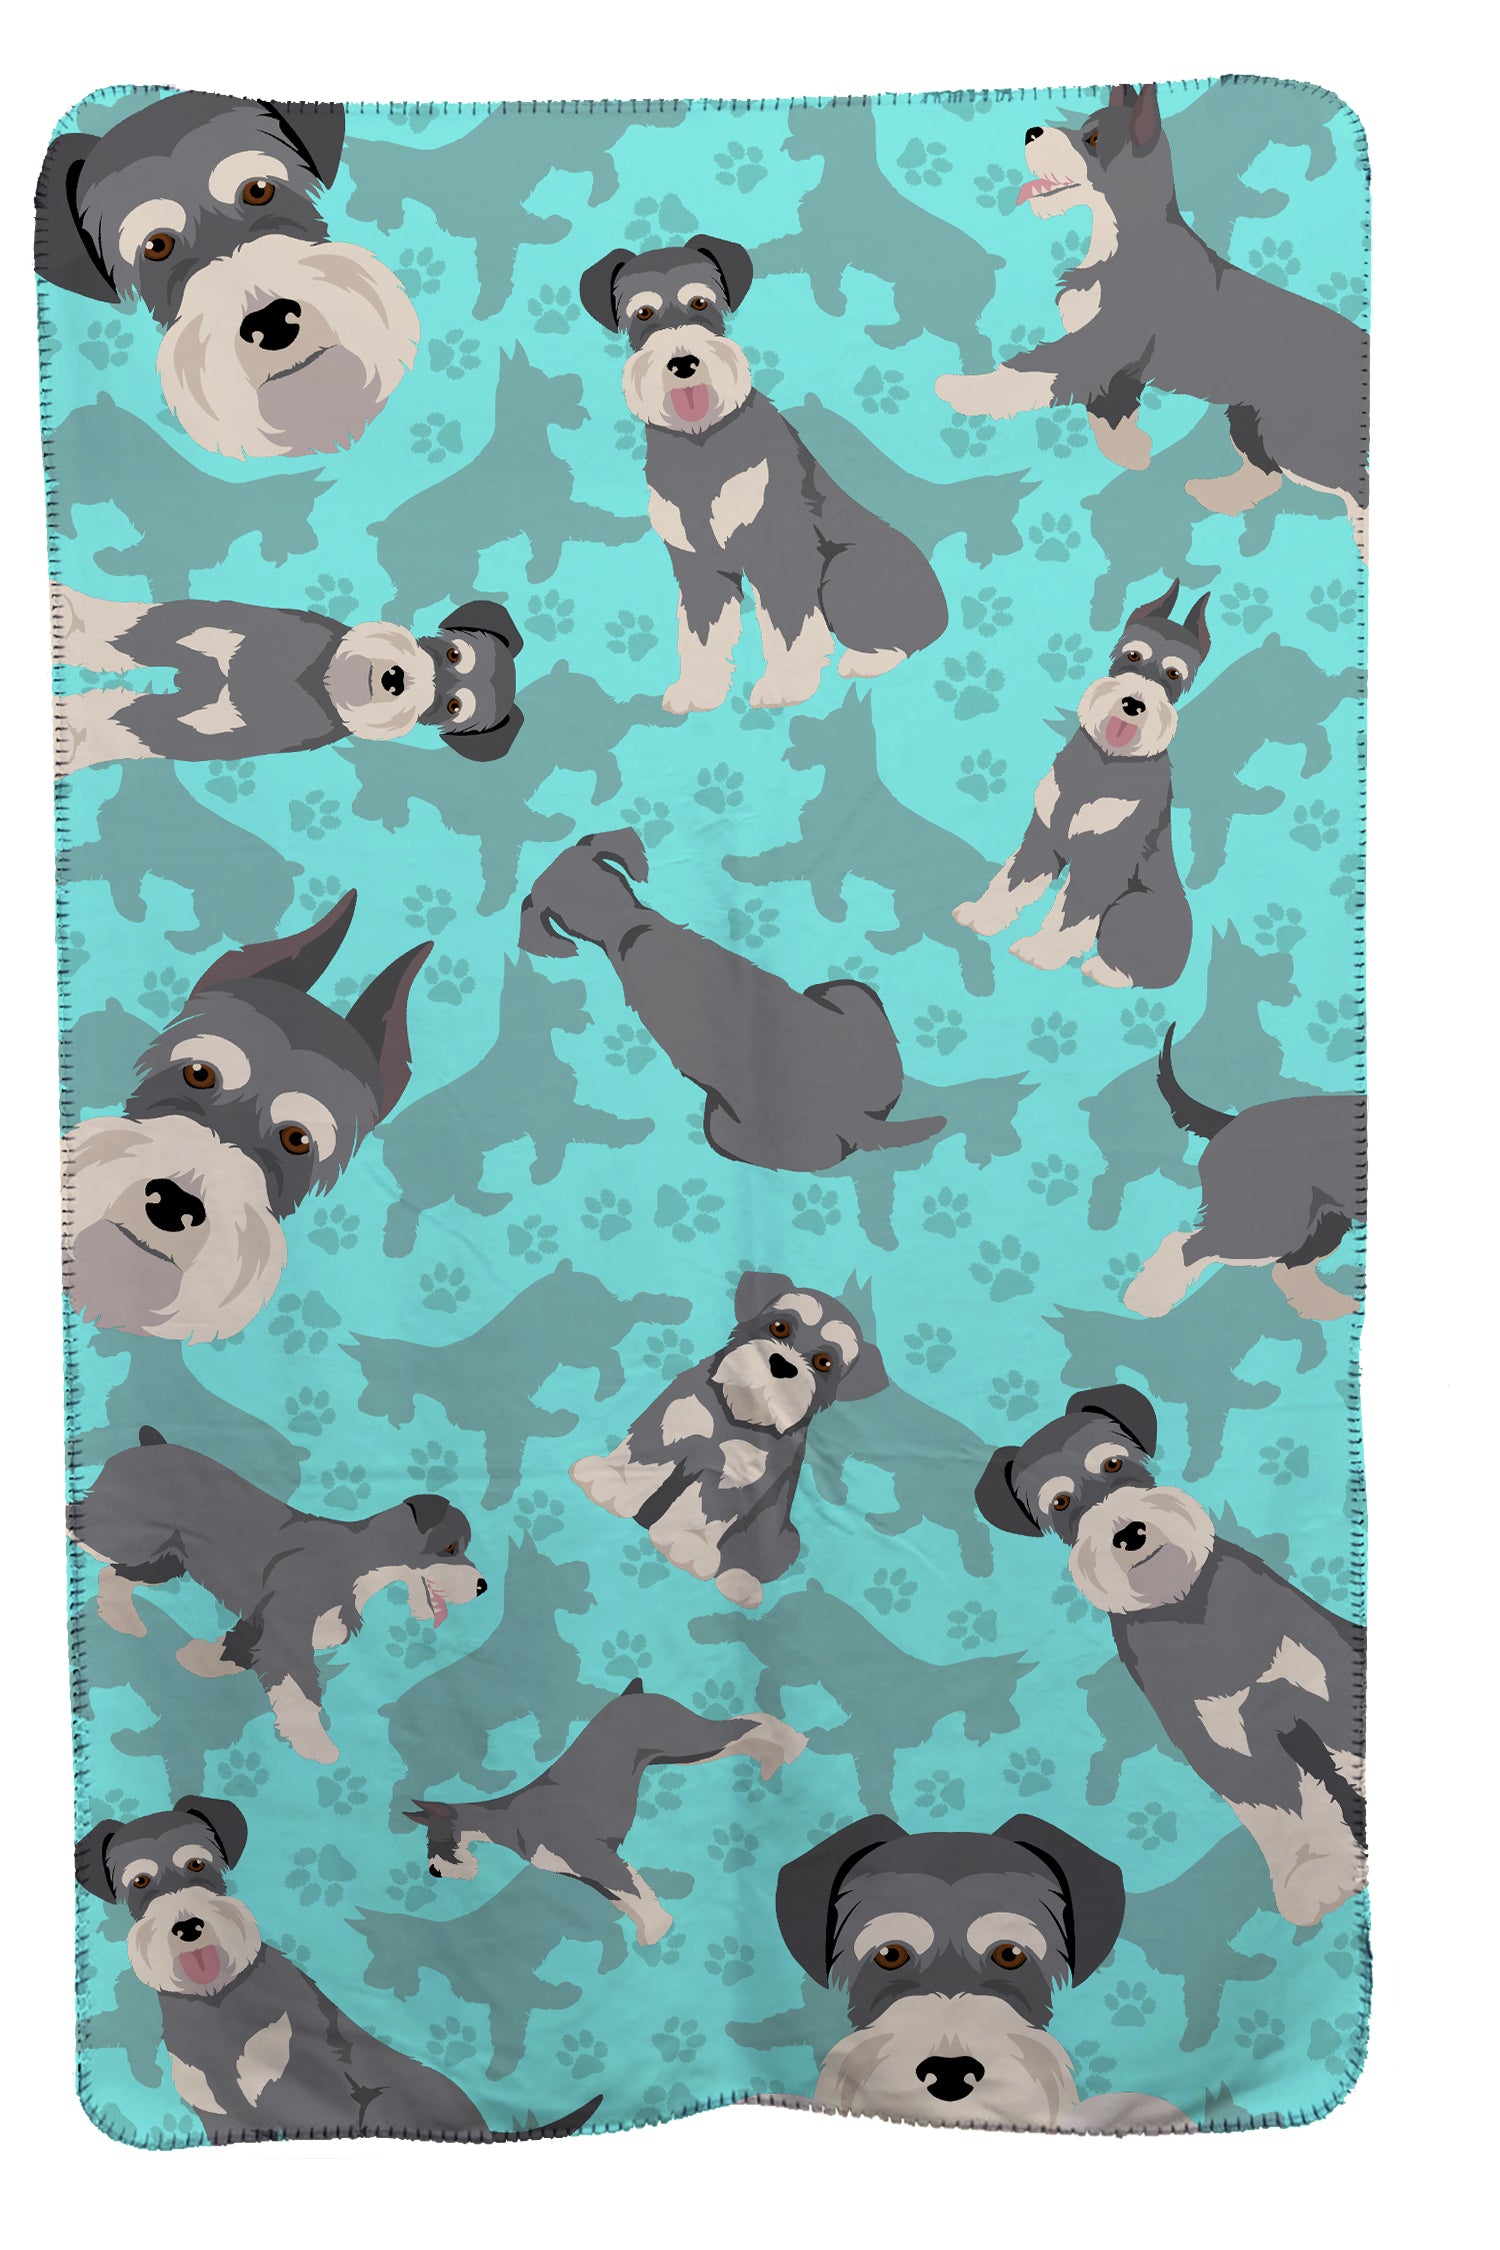 Buy this Schnauzer Soft Travel Blanket with Bag